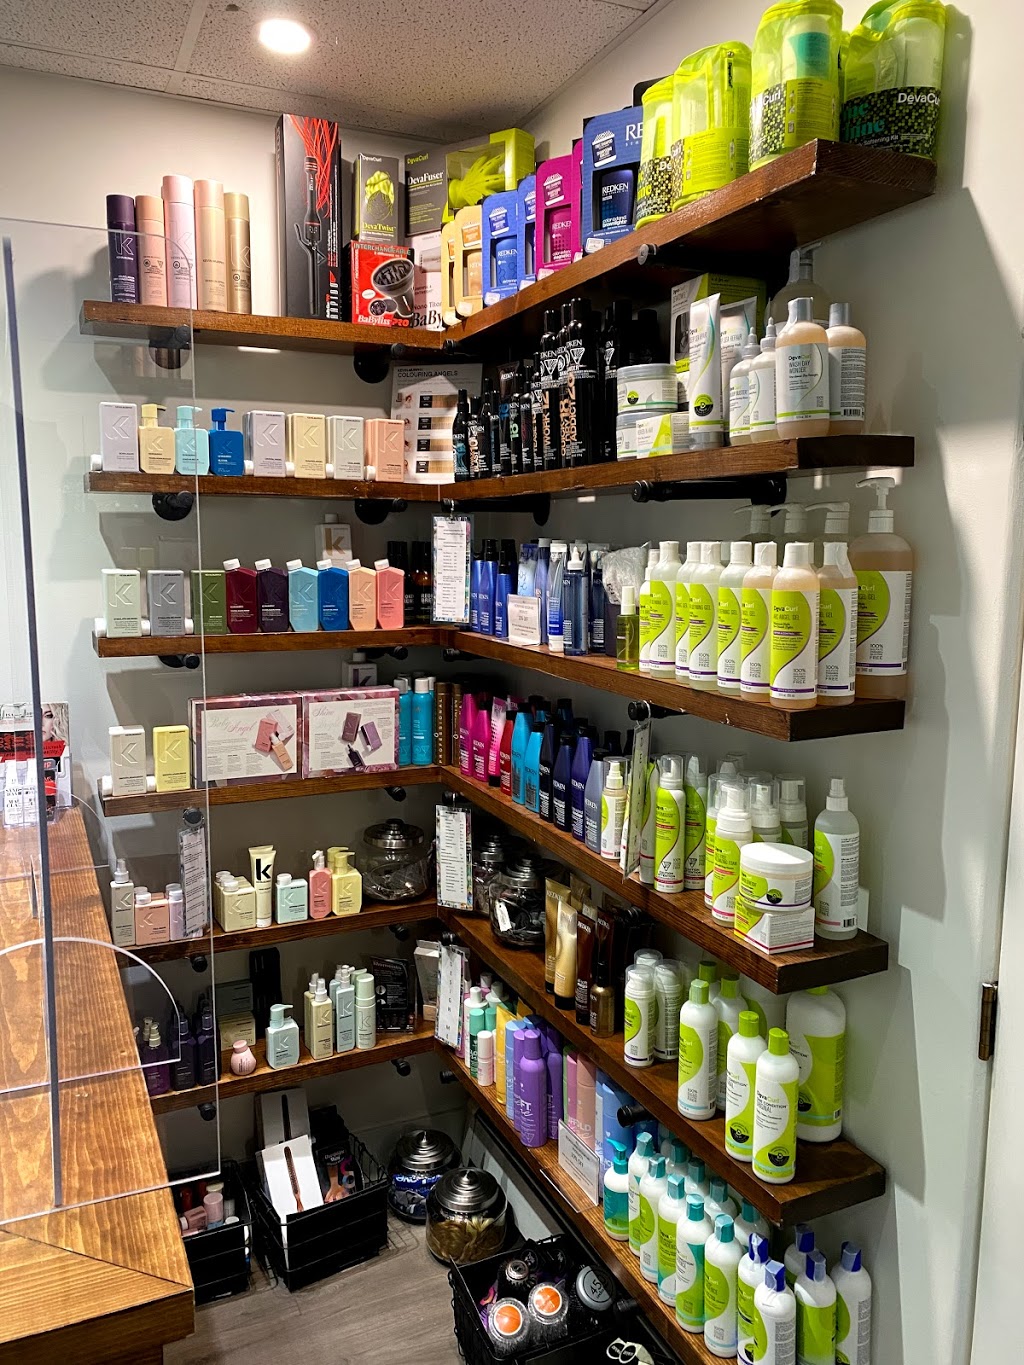 DC Krew a Hair Company | hair care | 1538 Foster St suit 101, White Rock, BC V4B 3X8, Canada | 6045310508 OR +1 604-531-0508